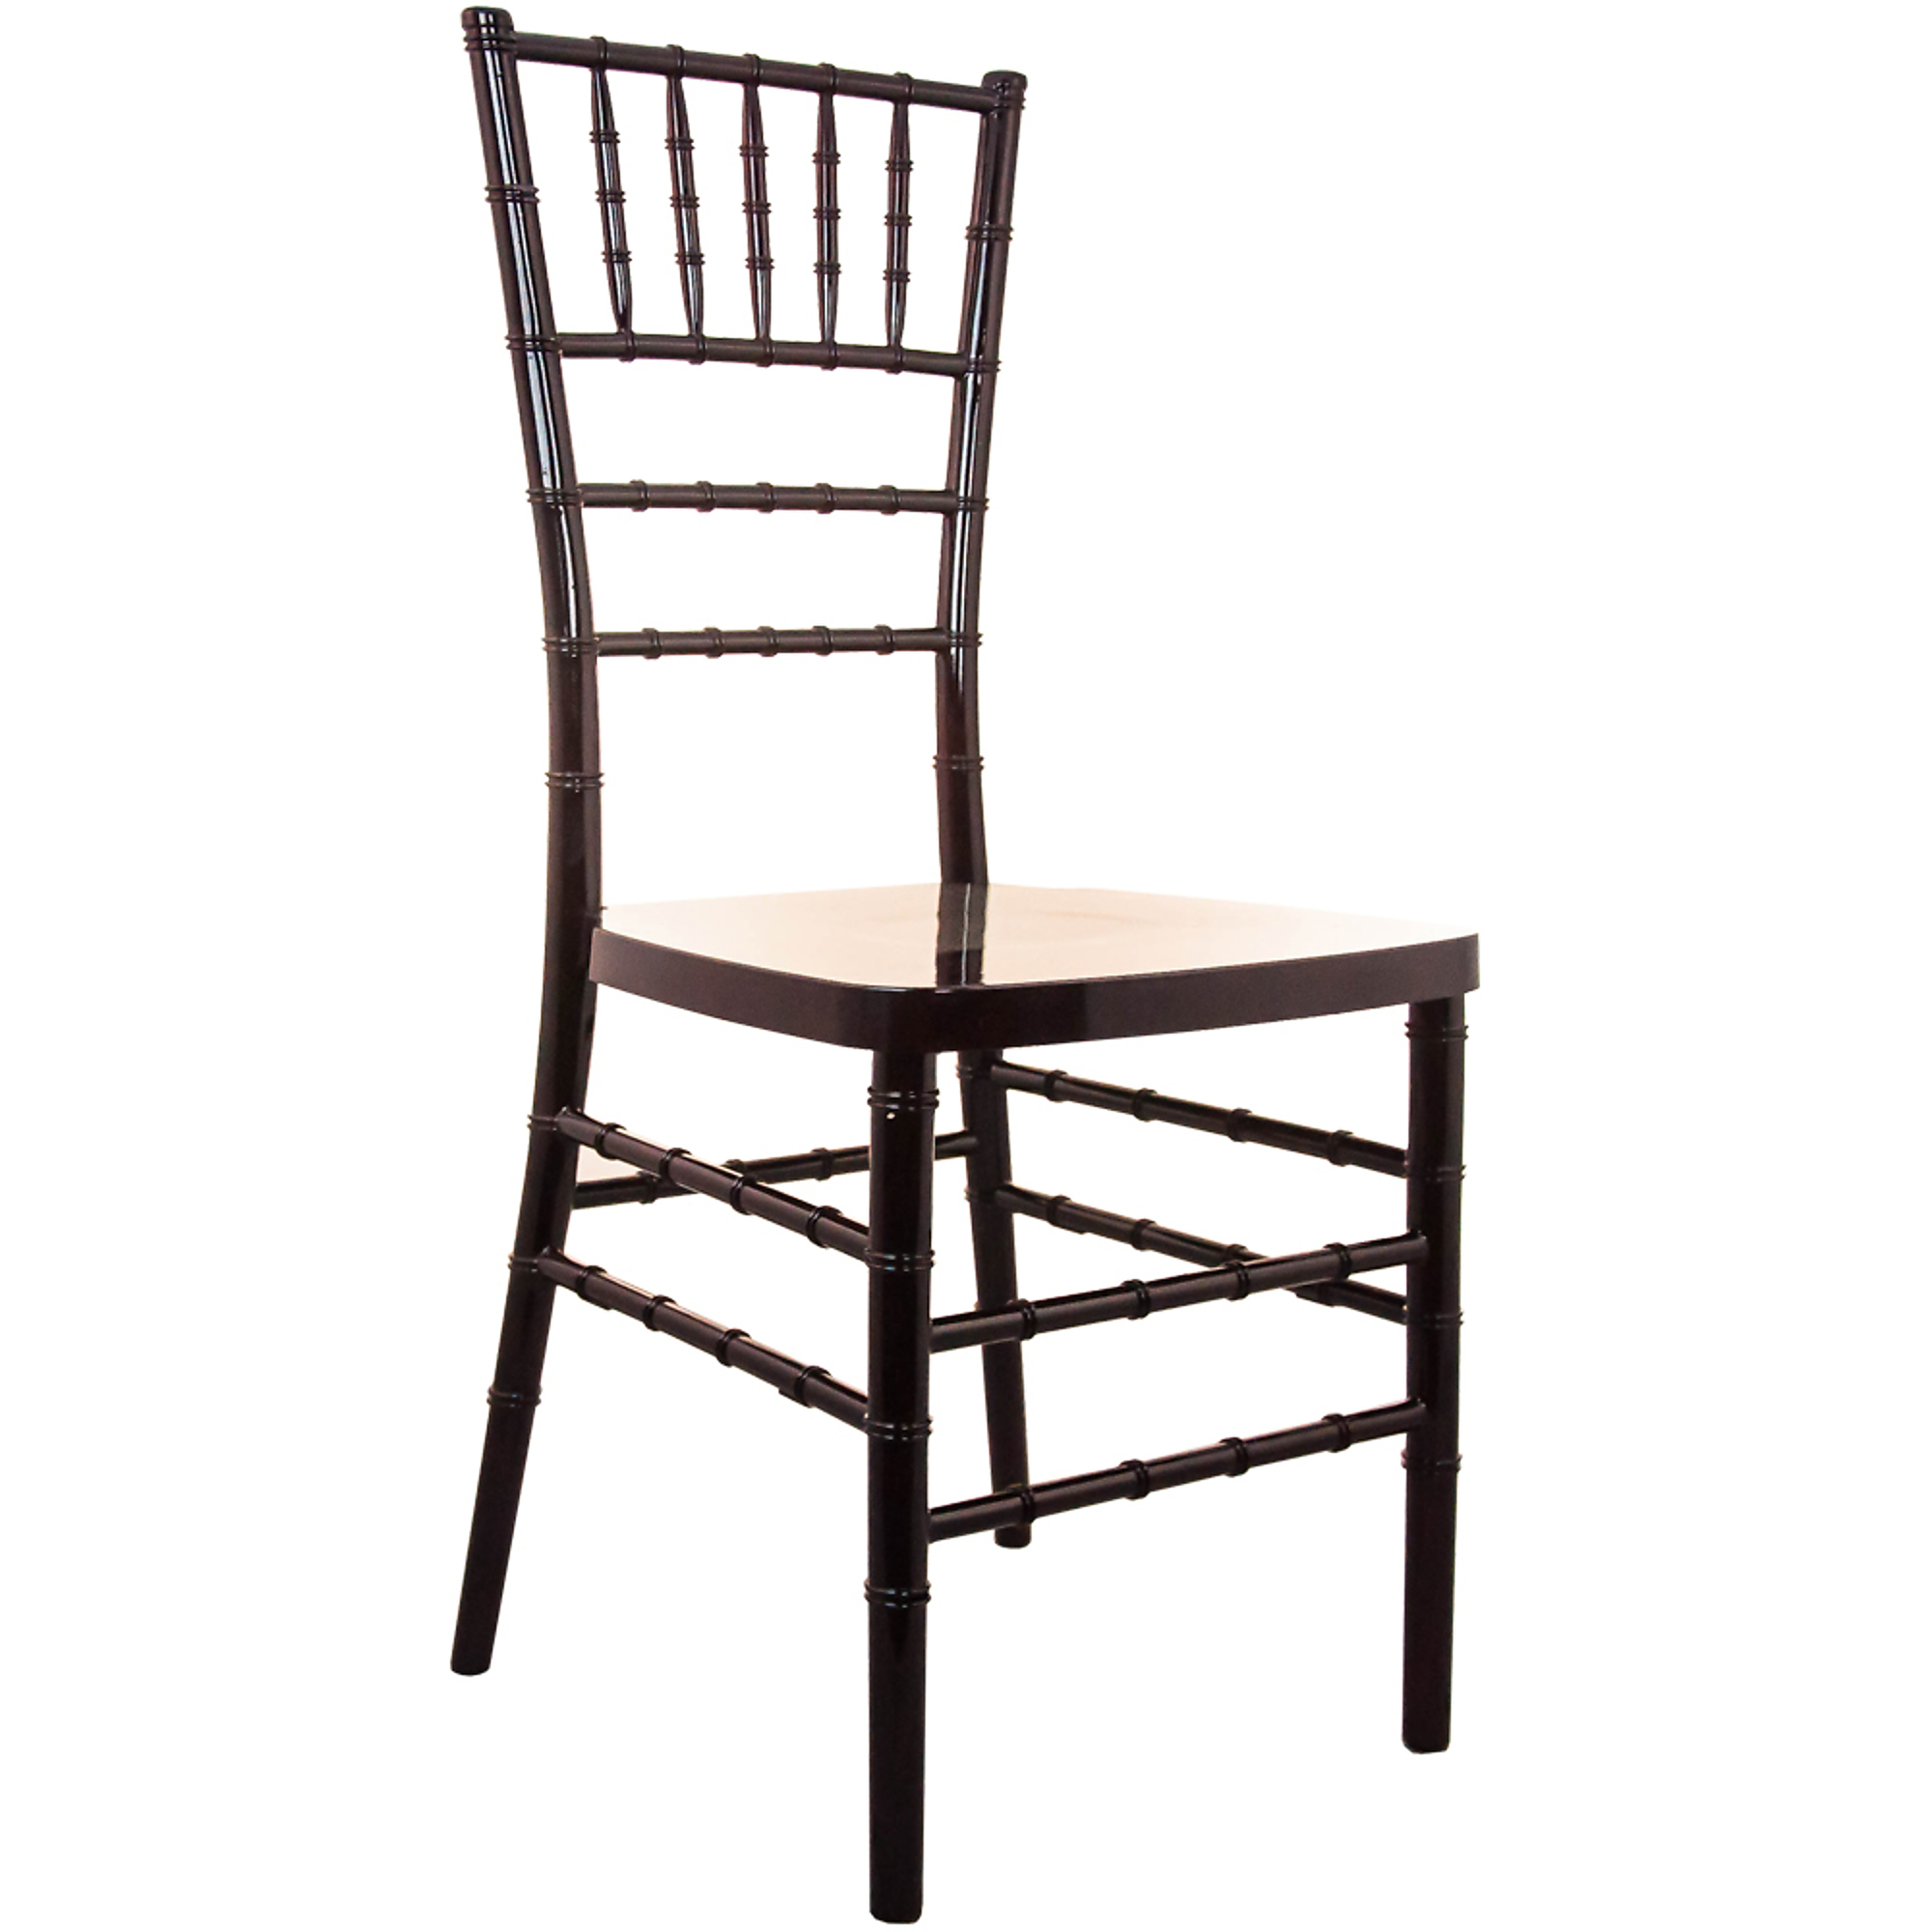 Flash Furniture, Mahogany Resin Chiavari Chair, Primary Color Brown, Included (qty.) 1, Model RSCHIM